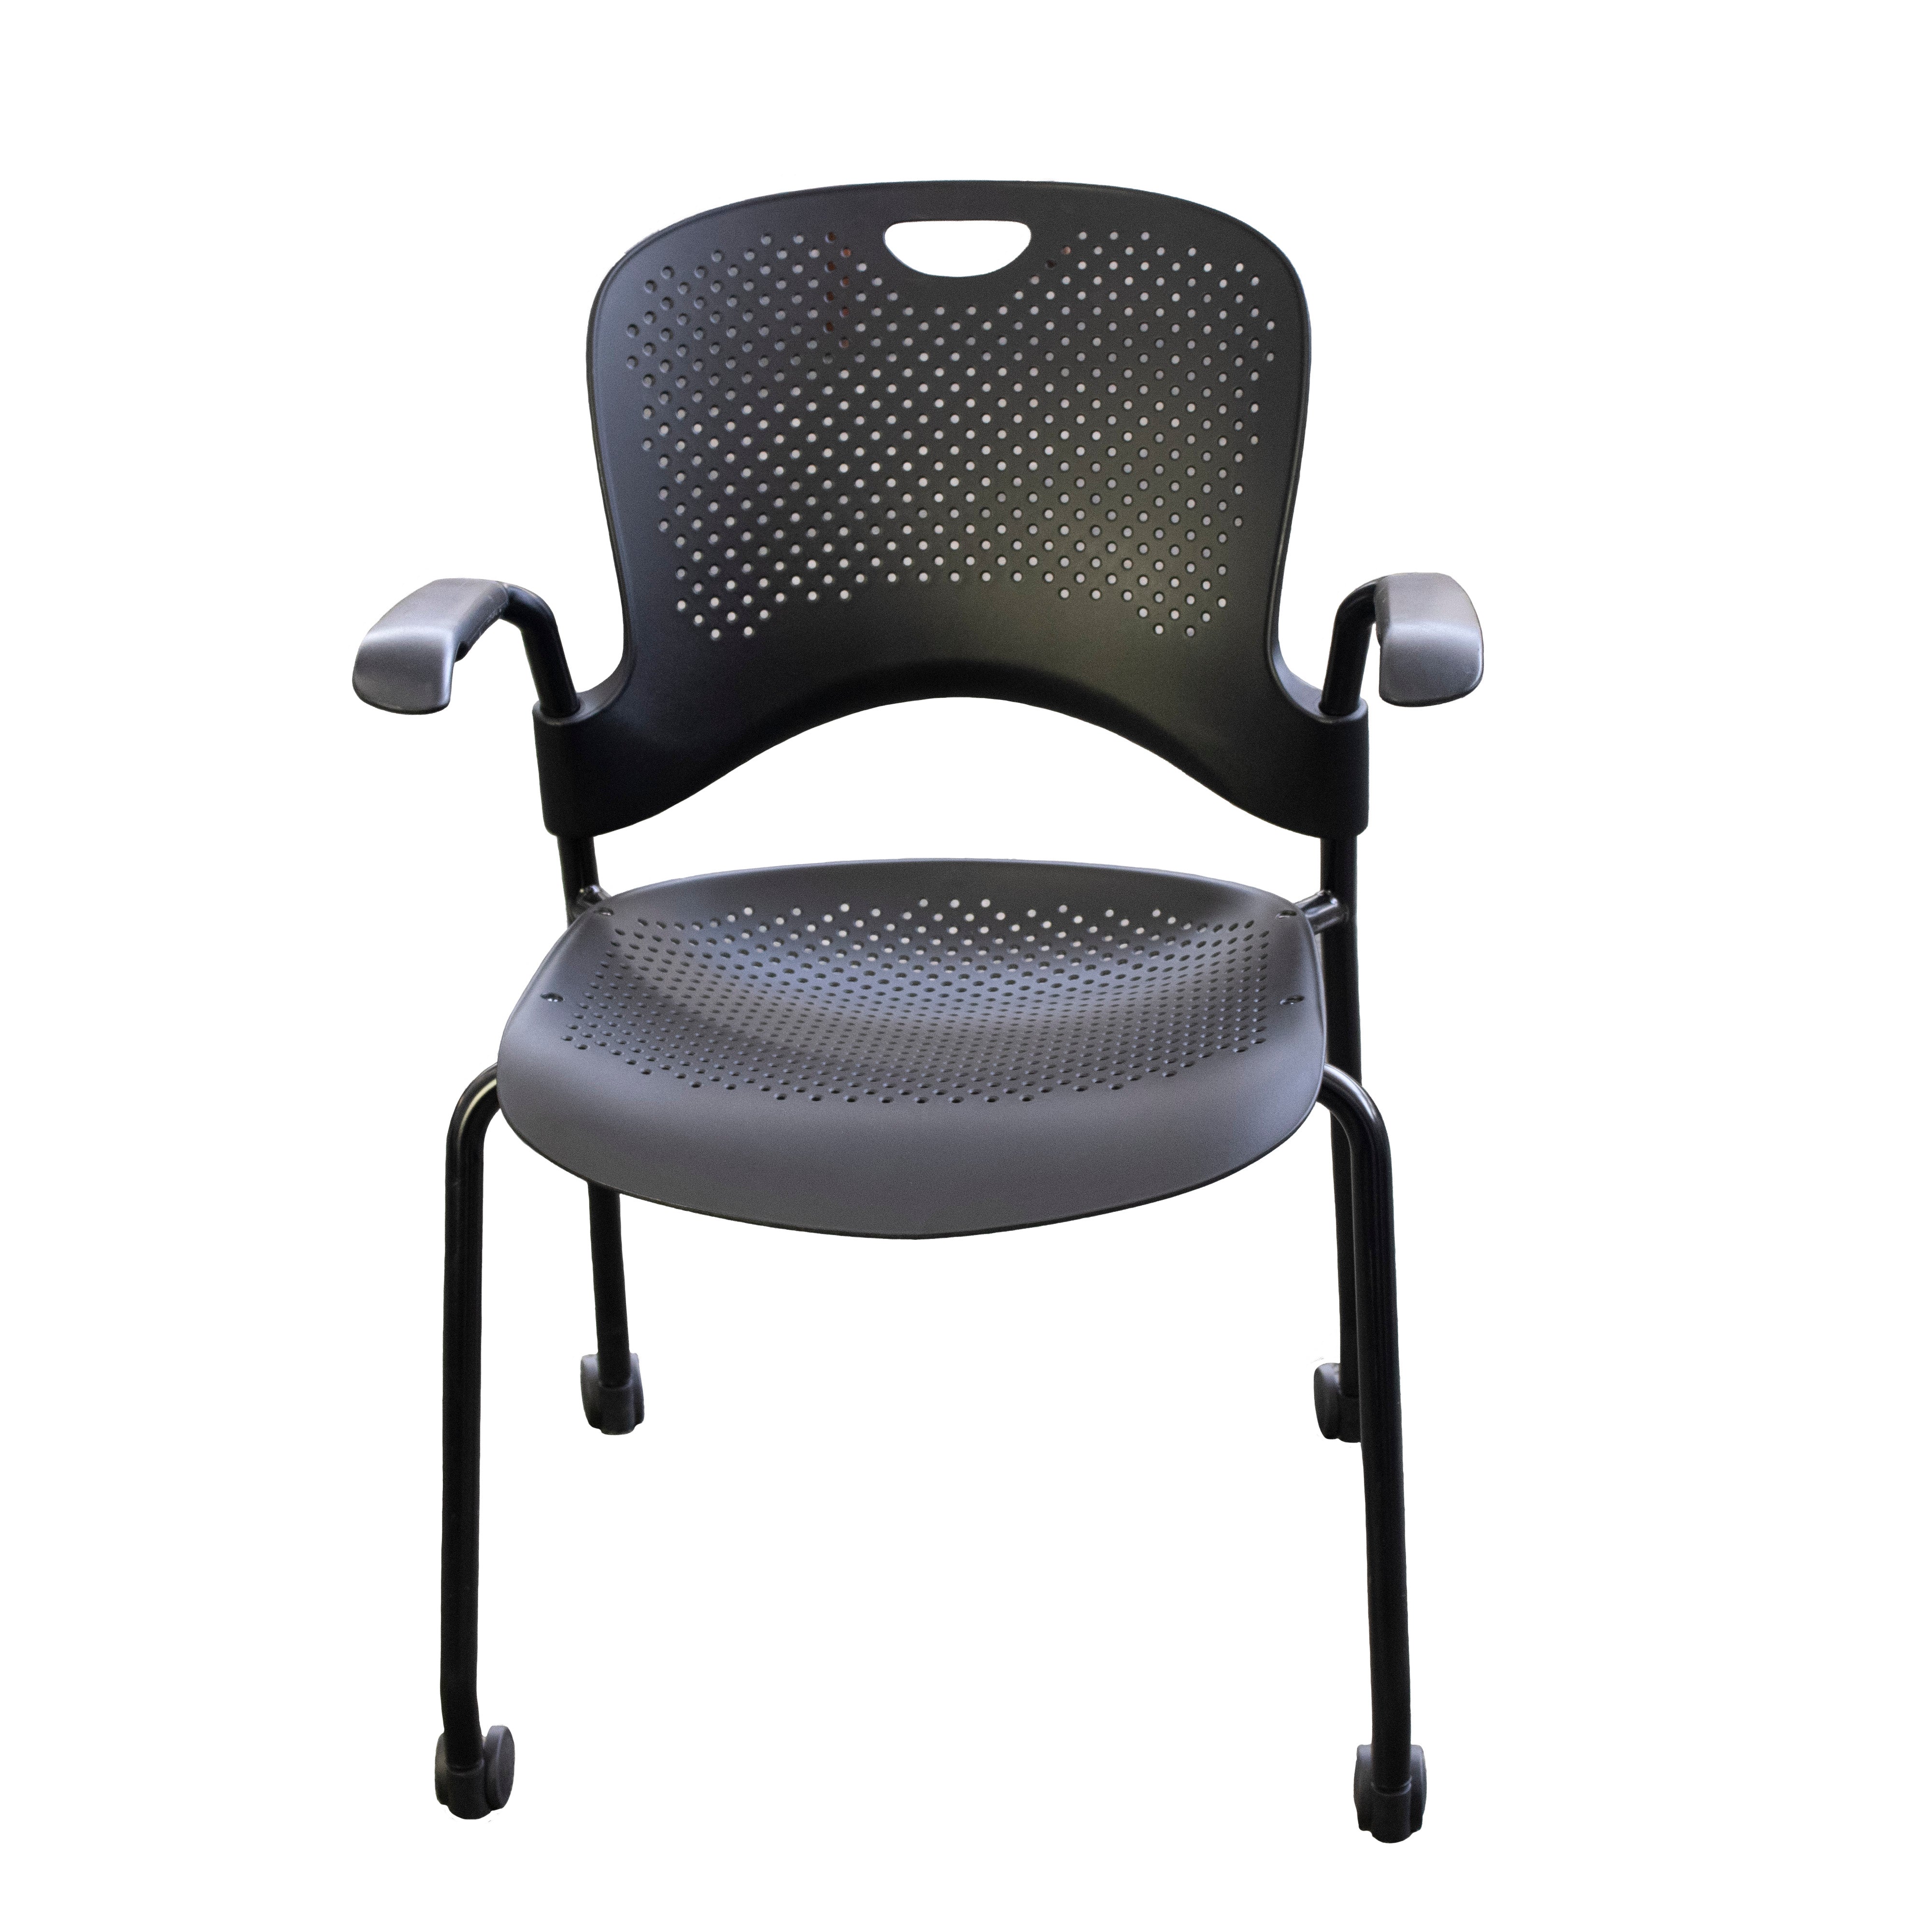 Herman Miller Caper Mobile Stack Chair w/Casters, Black - Preowned